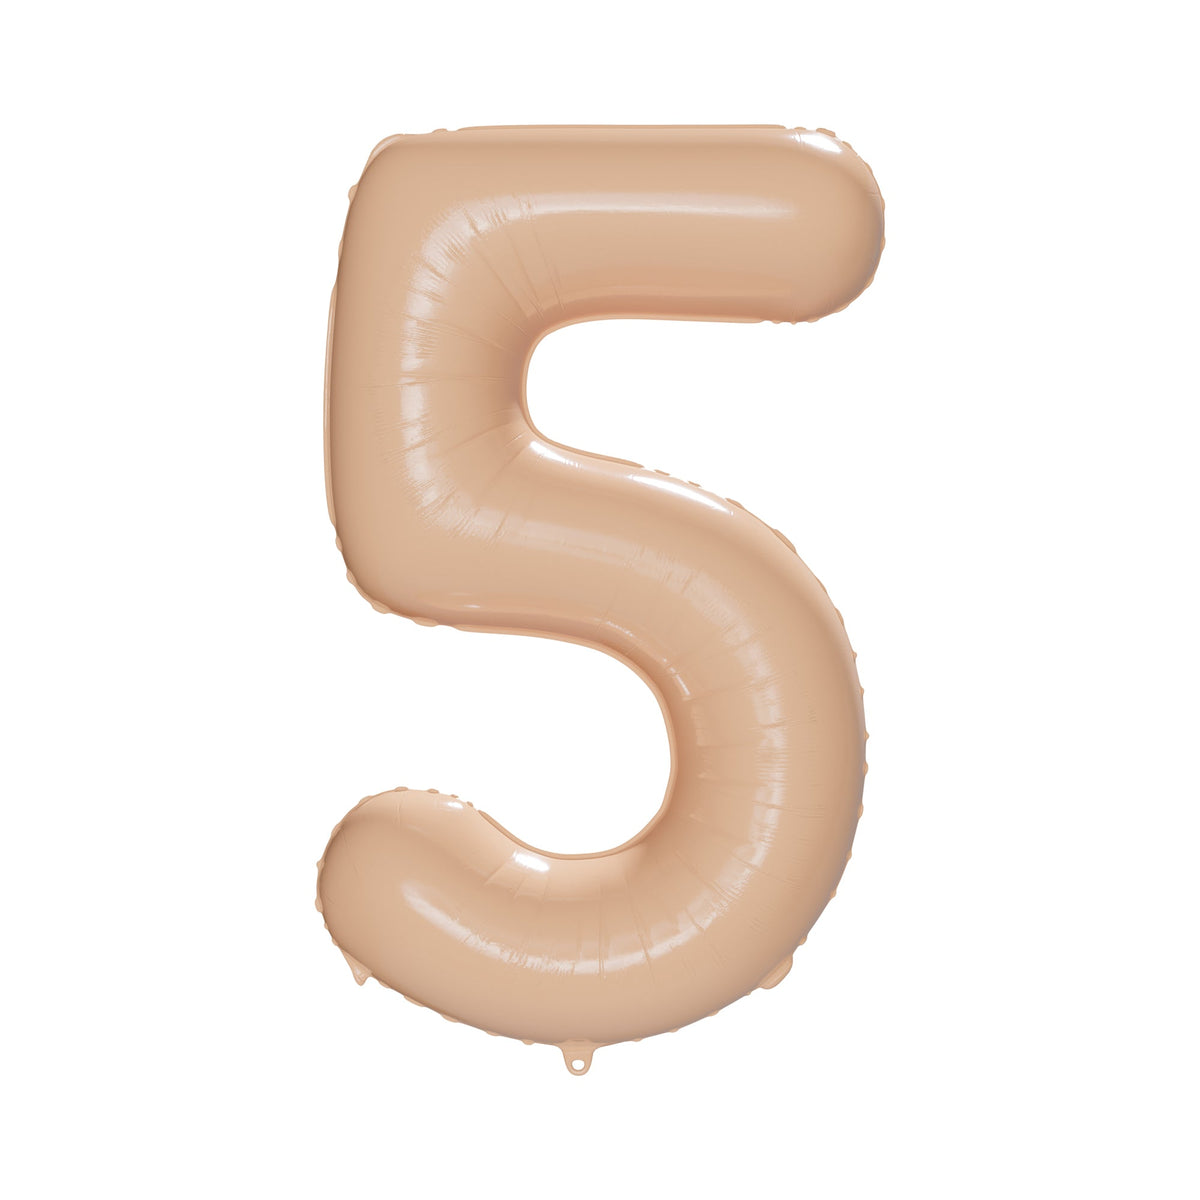 PARTYGRAM Balloons Blush Nude Number 5 Foil Balloon, Creamy Beige Matte Finish, Cappuccino, 34 Inches 810077658390